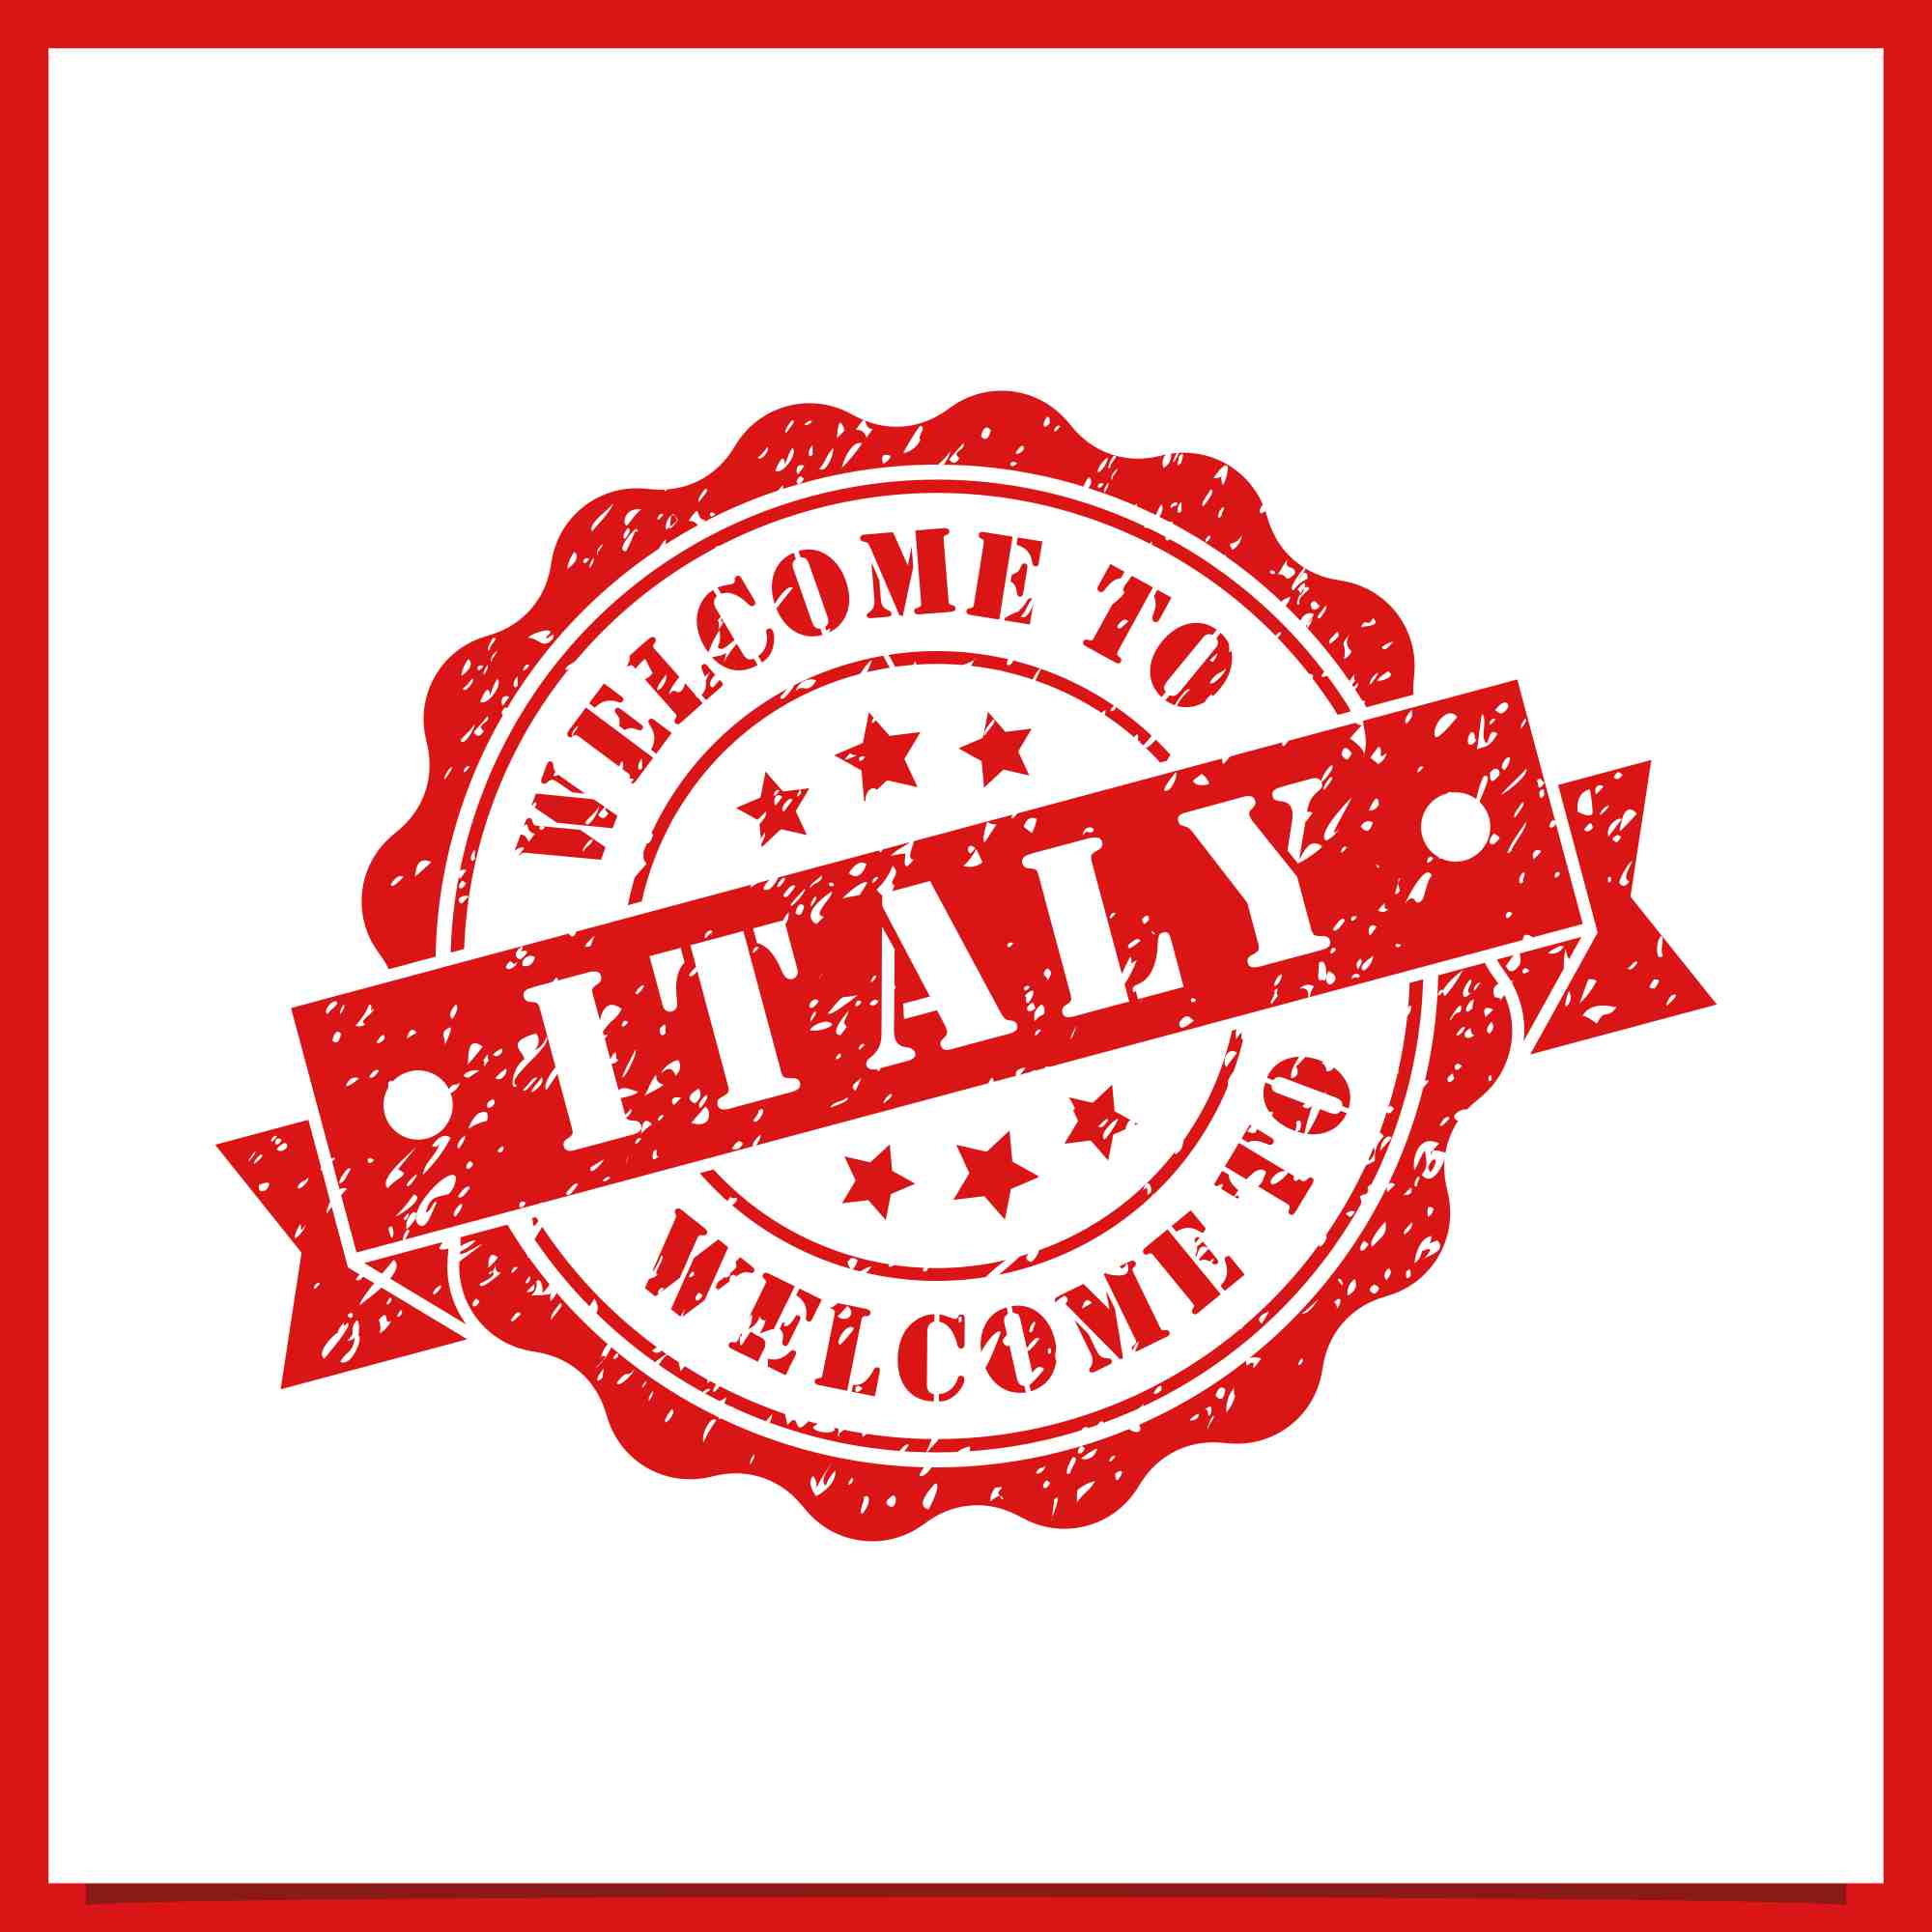 Welcome to Italy stamps vector logo design collection - $4 preview image.